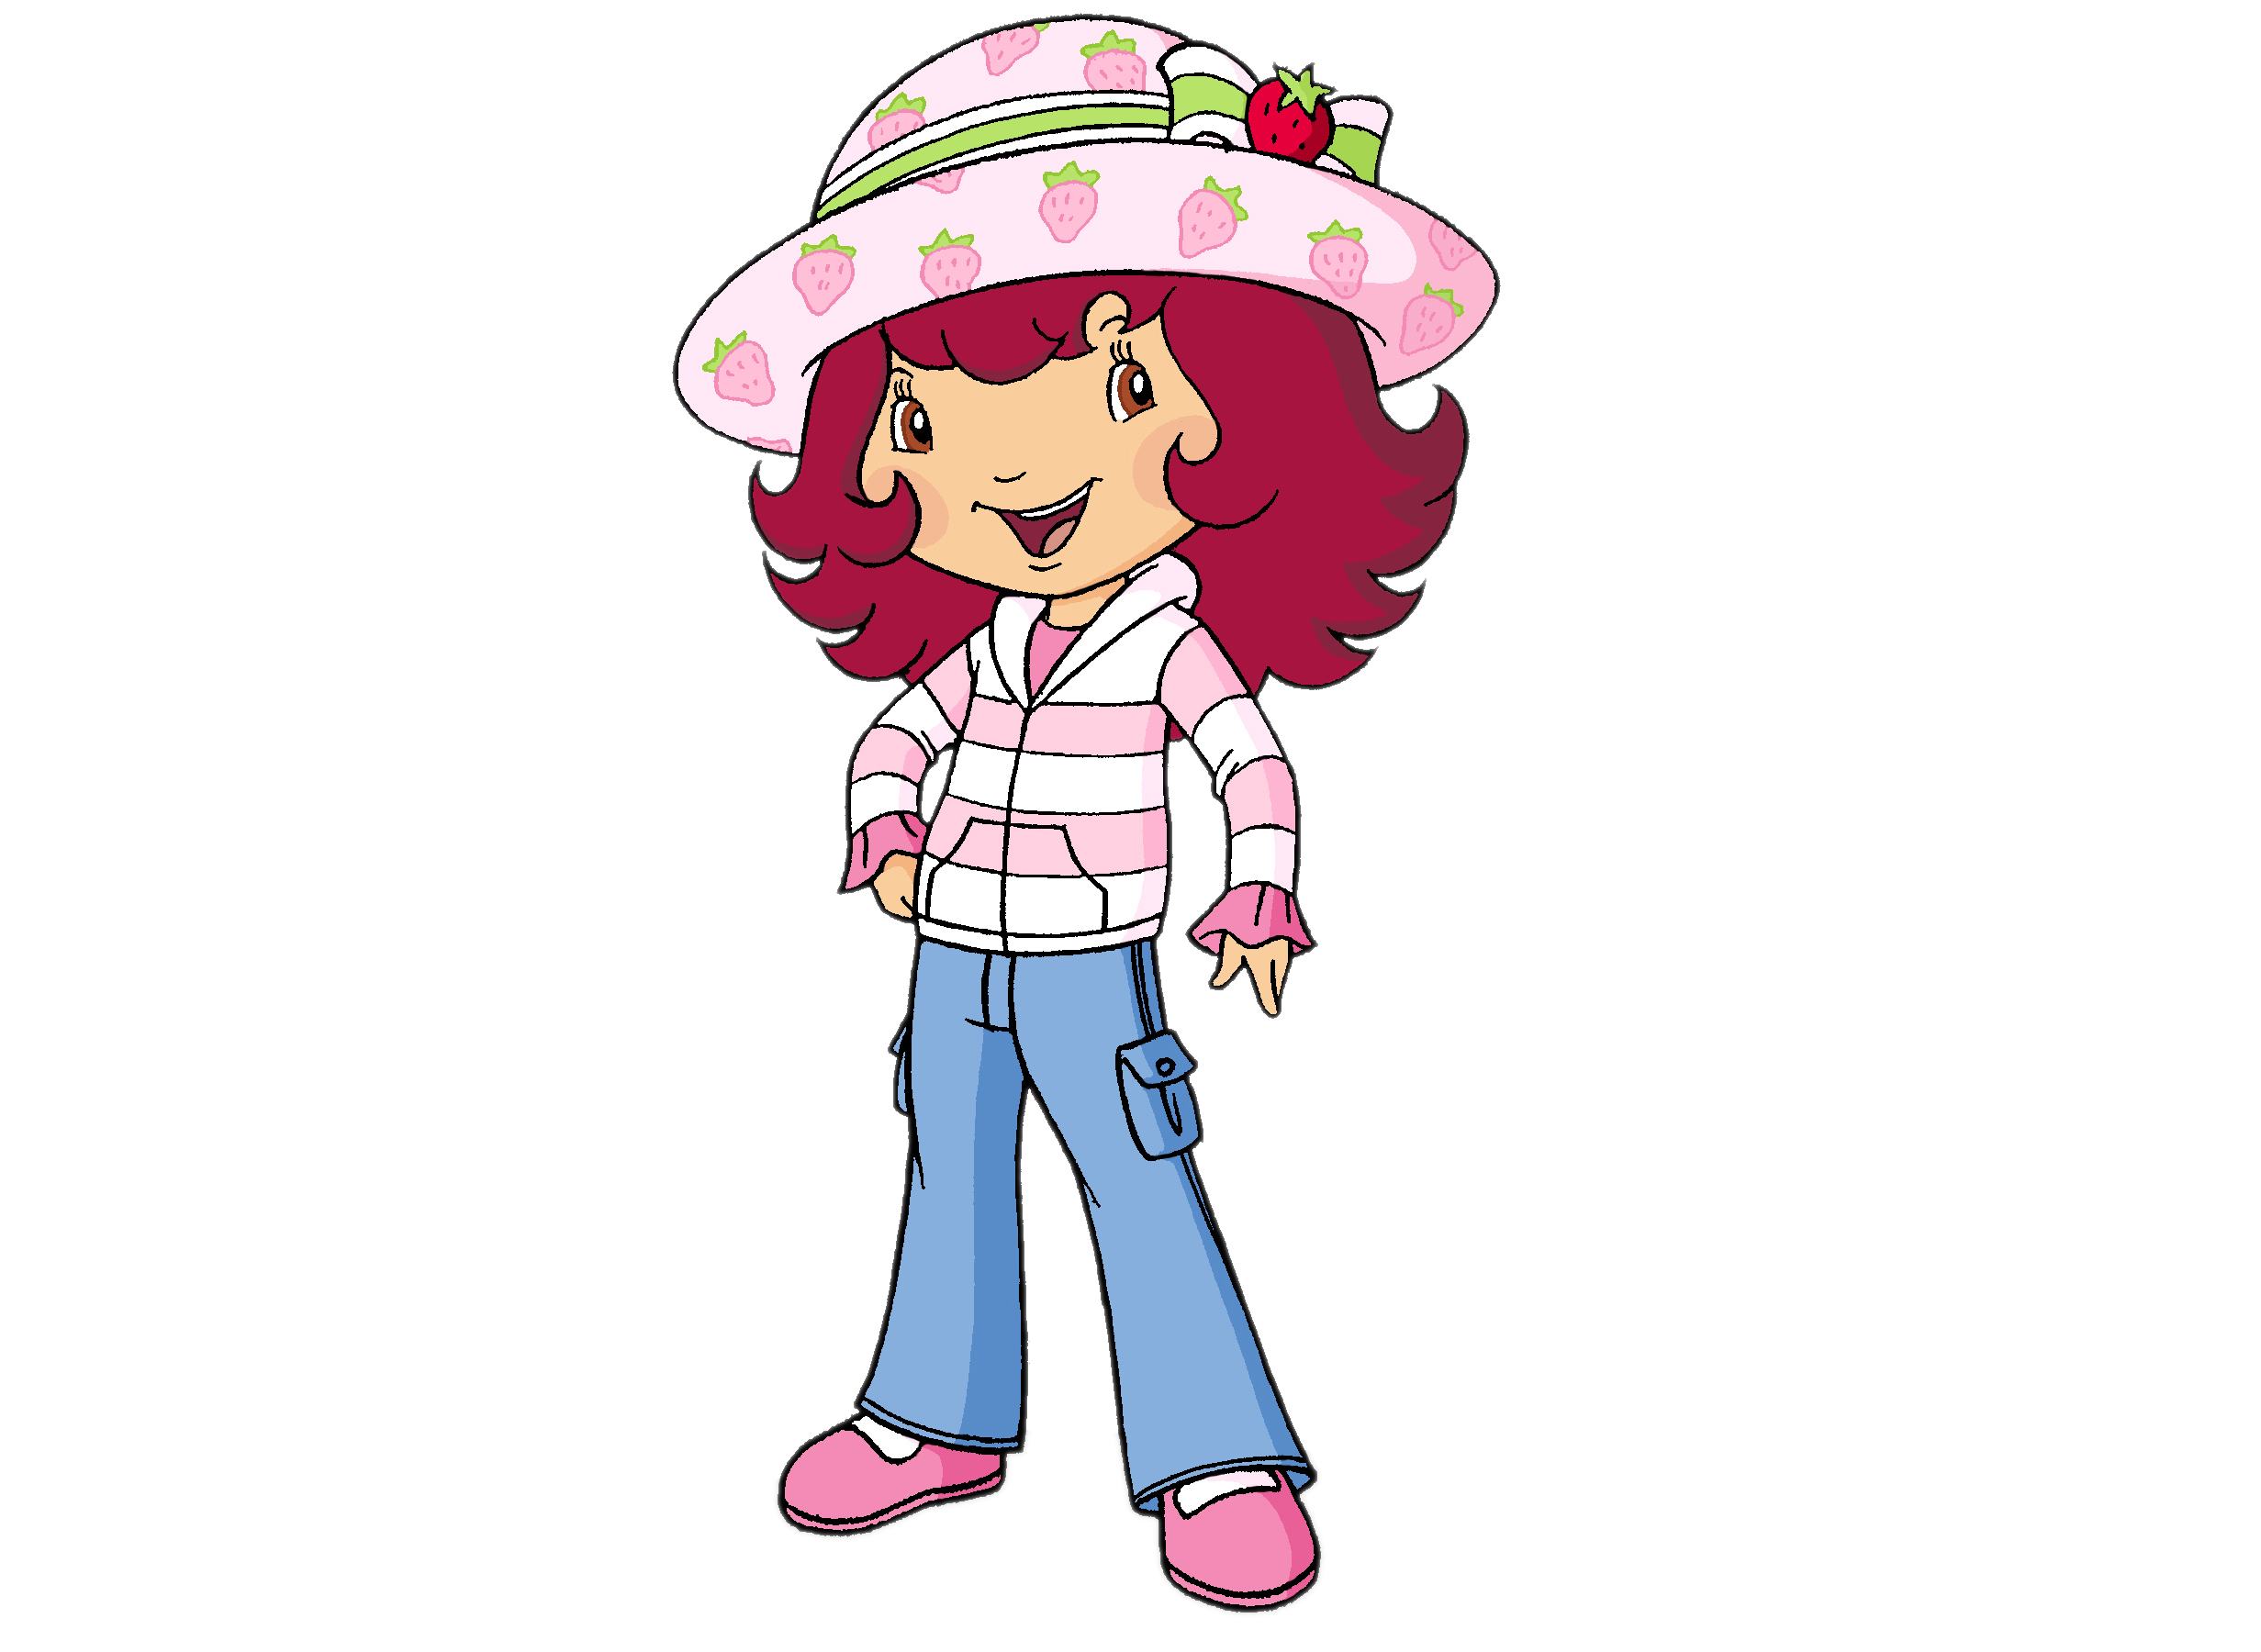 all strawberry shortcake characters